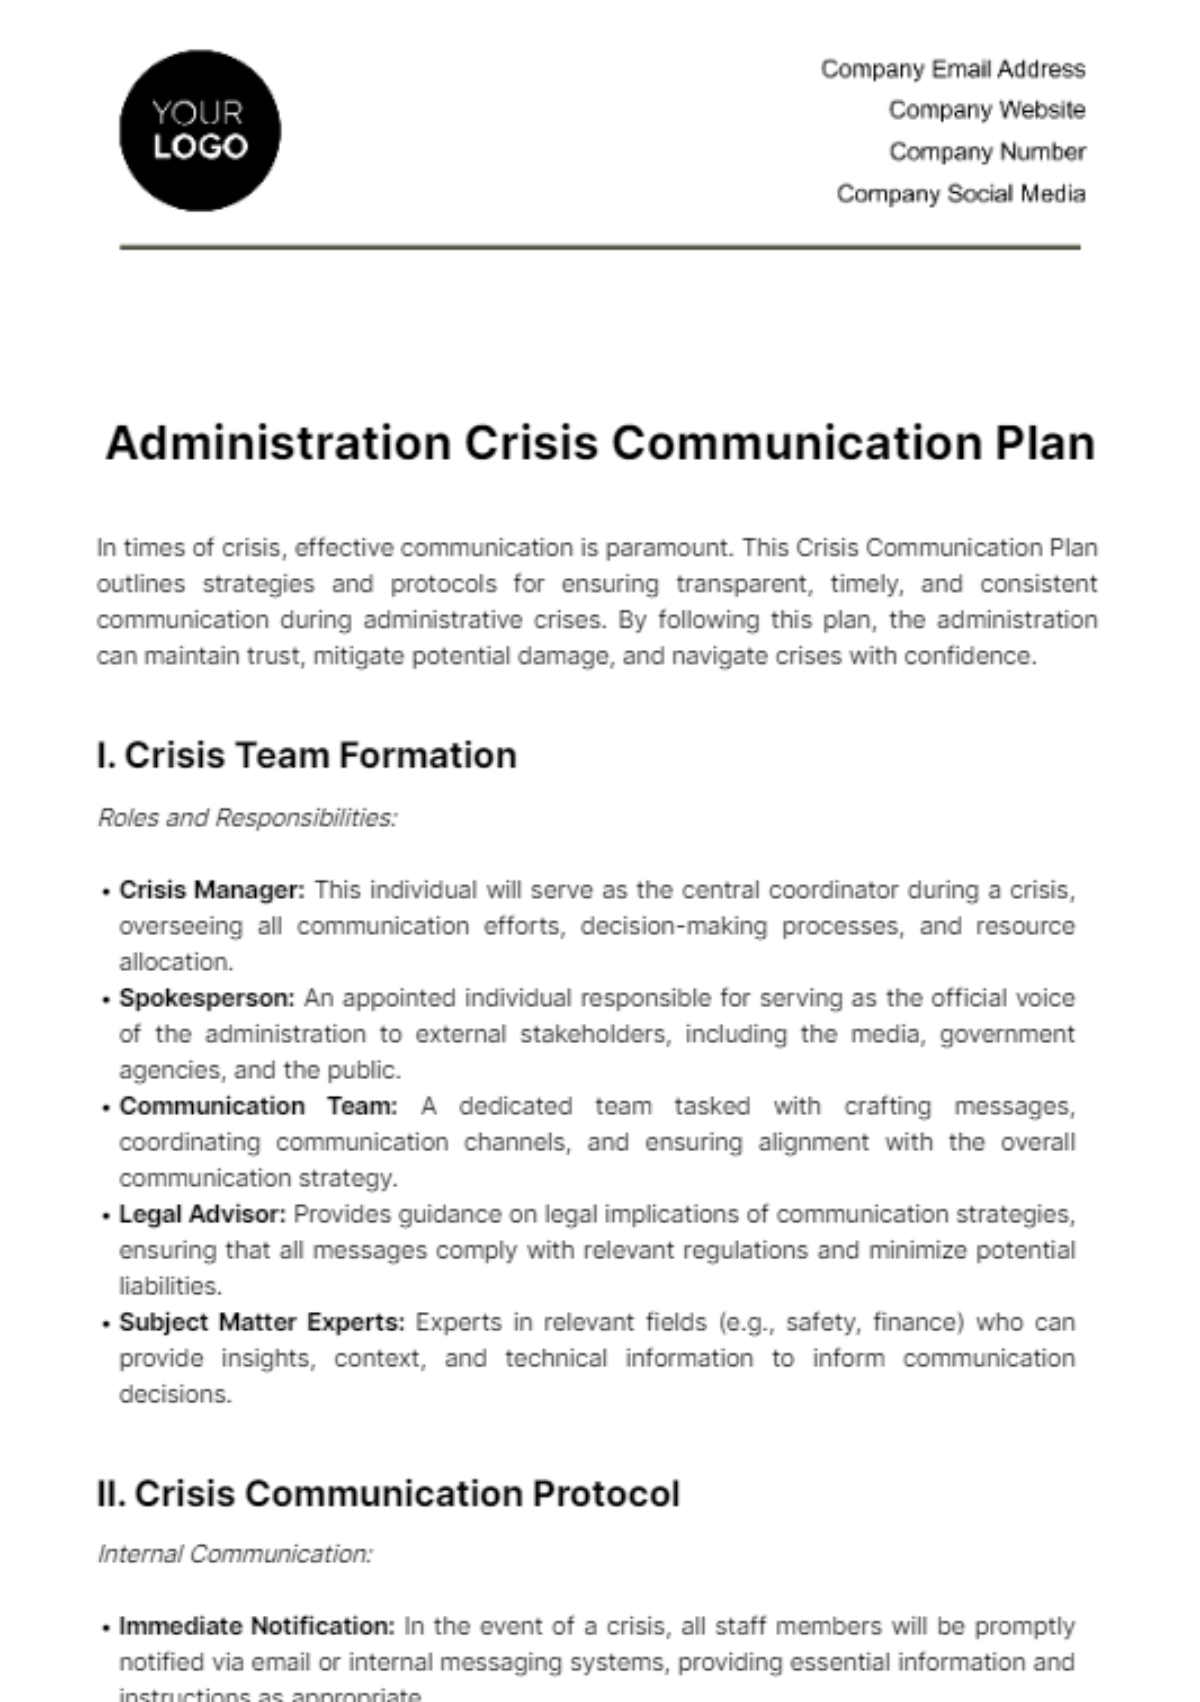 Free Administration Crisis Communication Plan Template